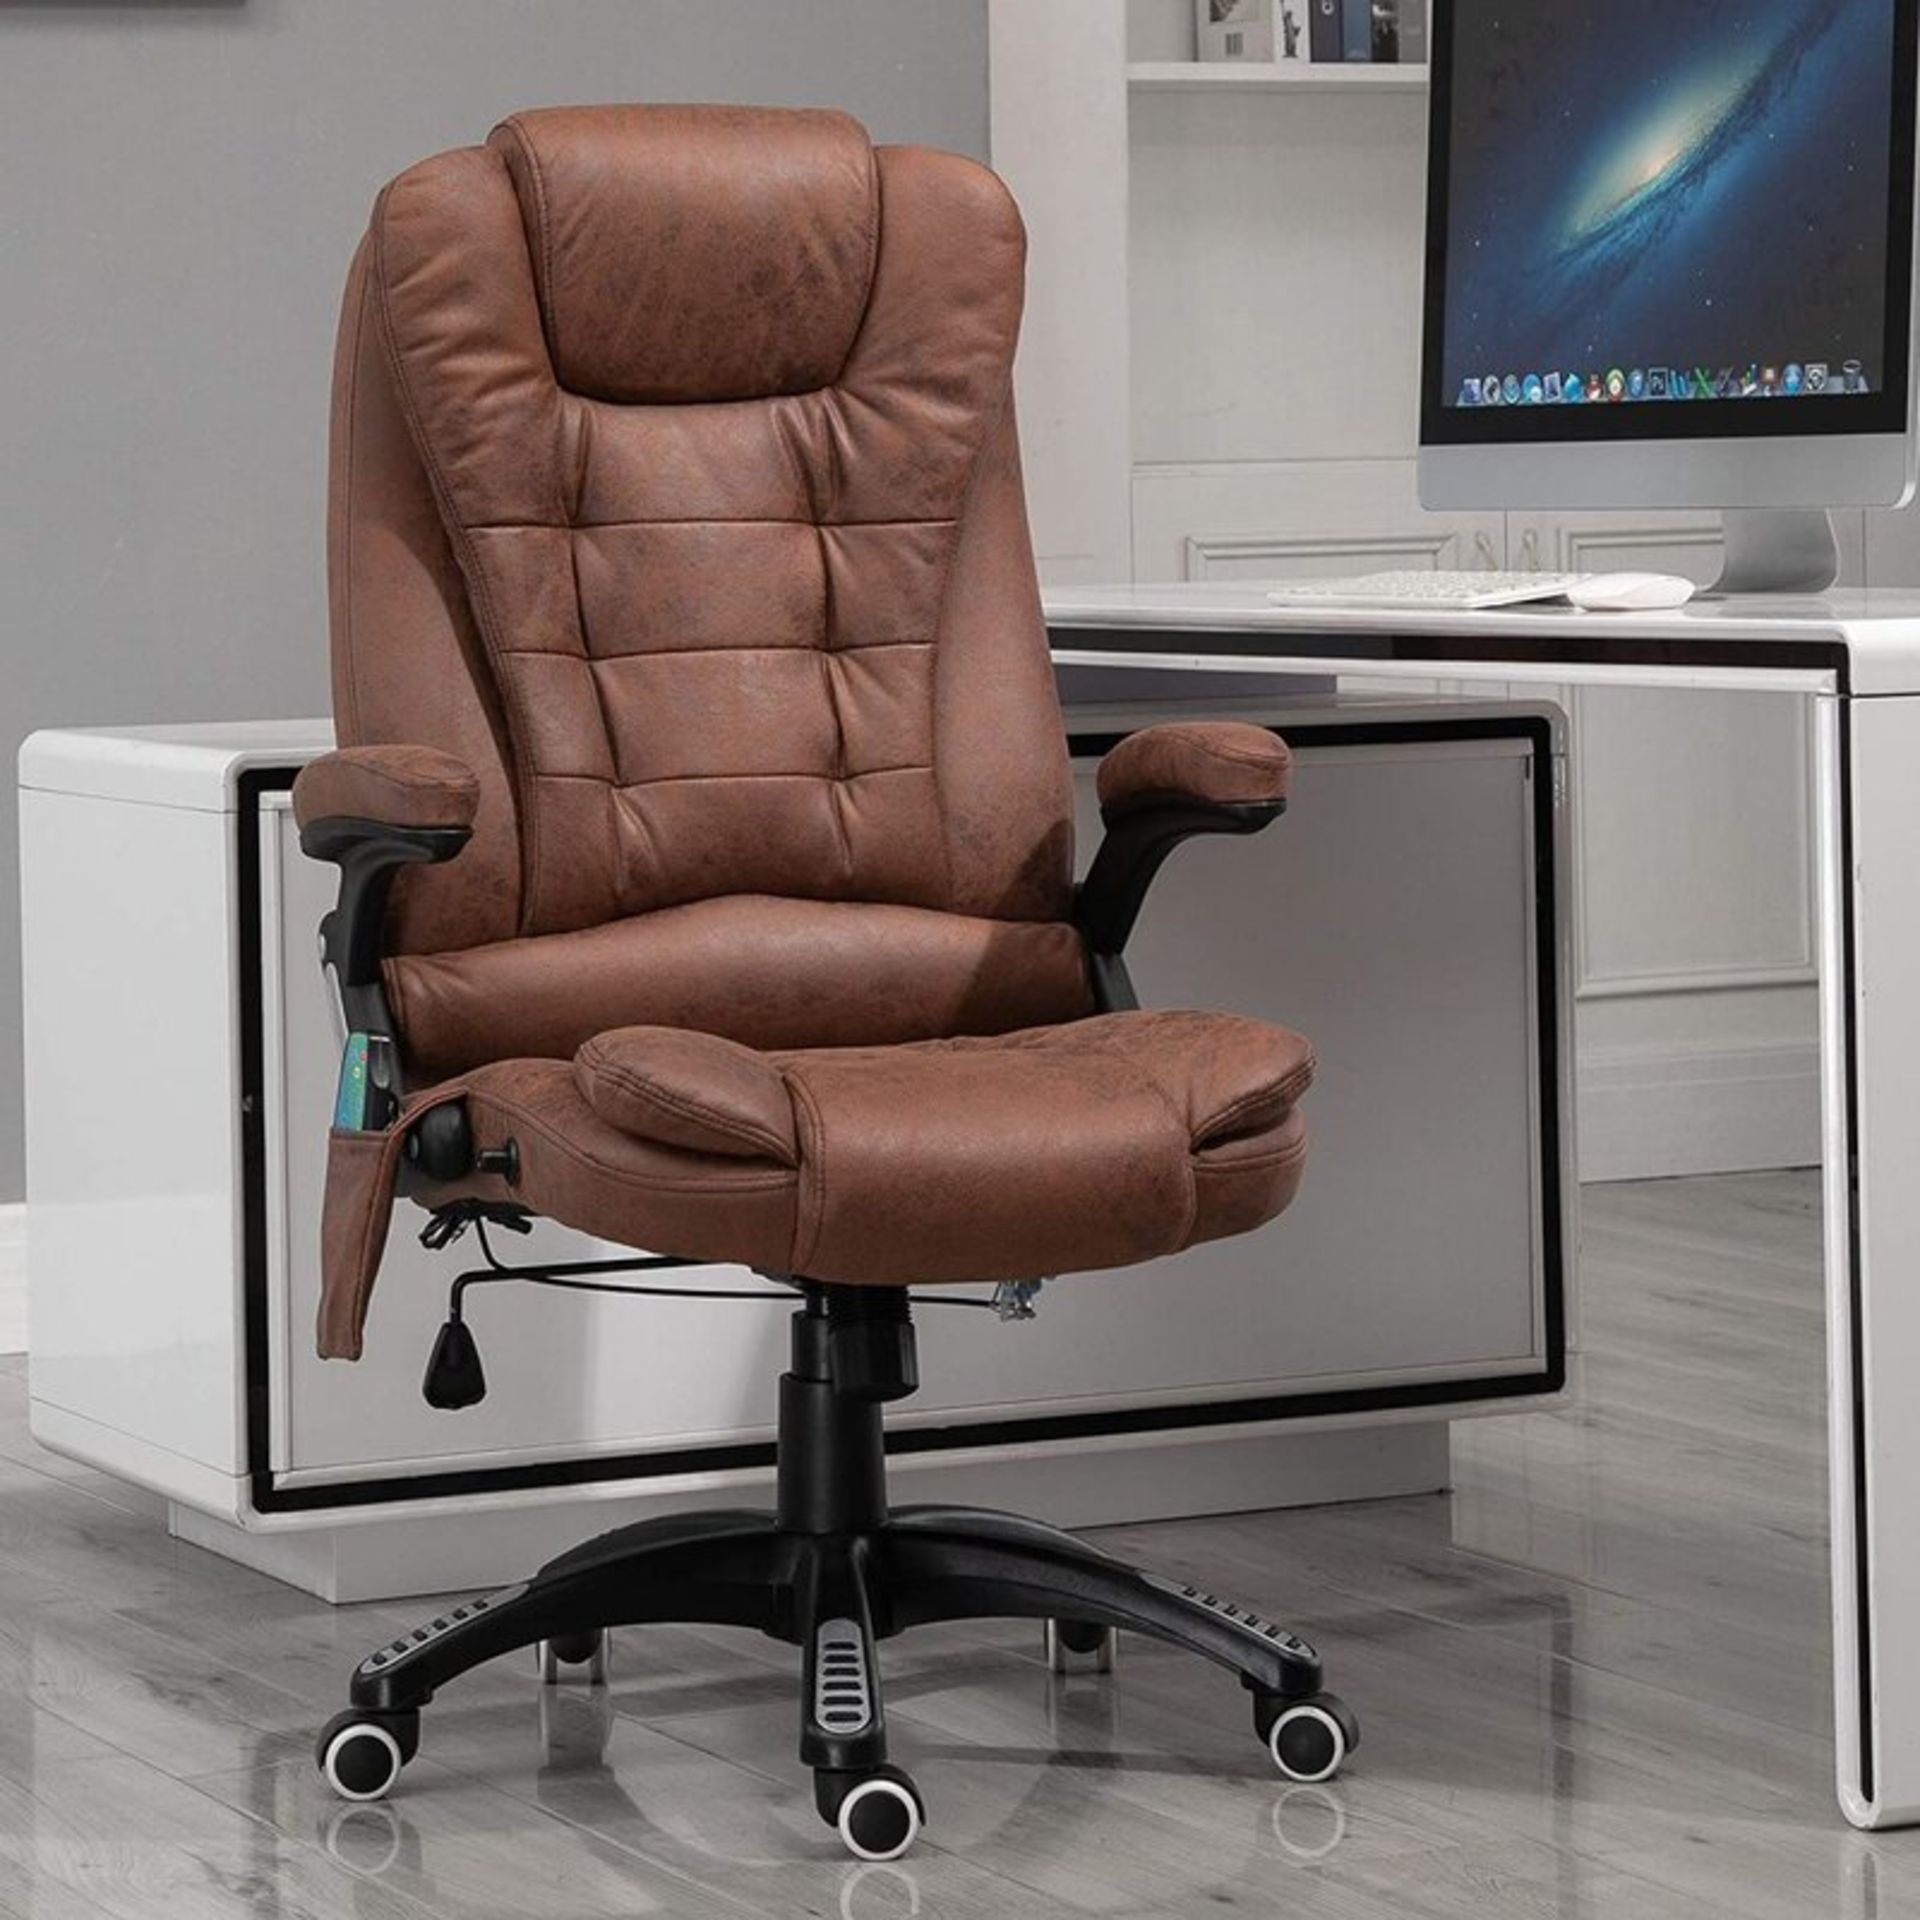 Forestdale Executive Chair RRP £419.99